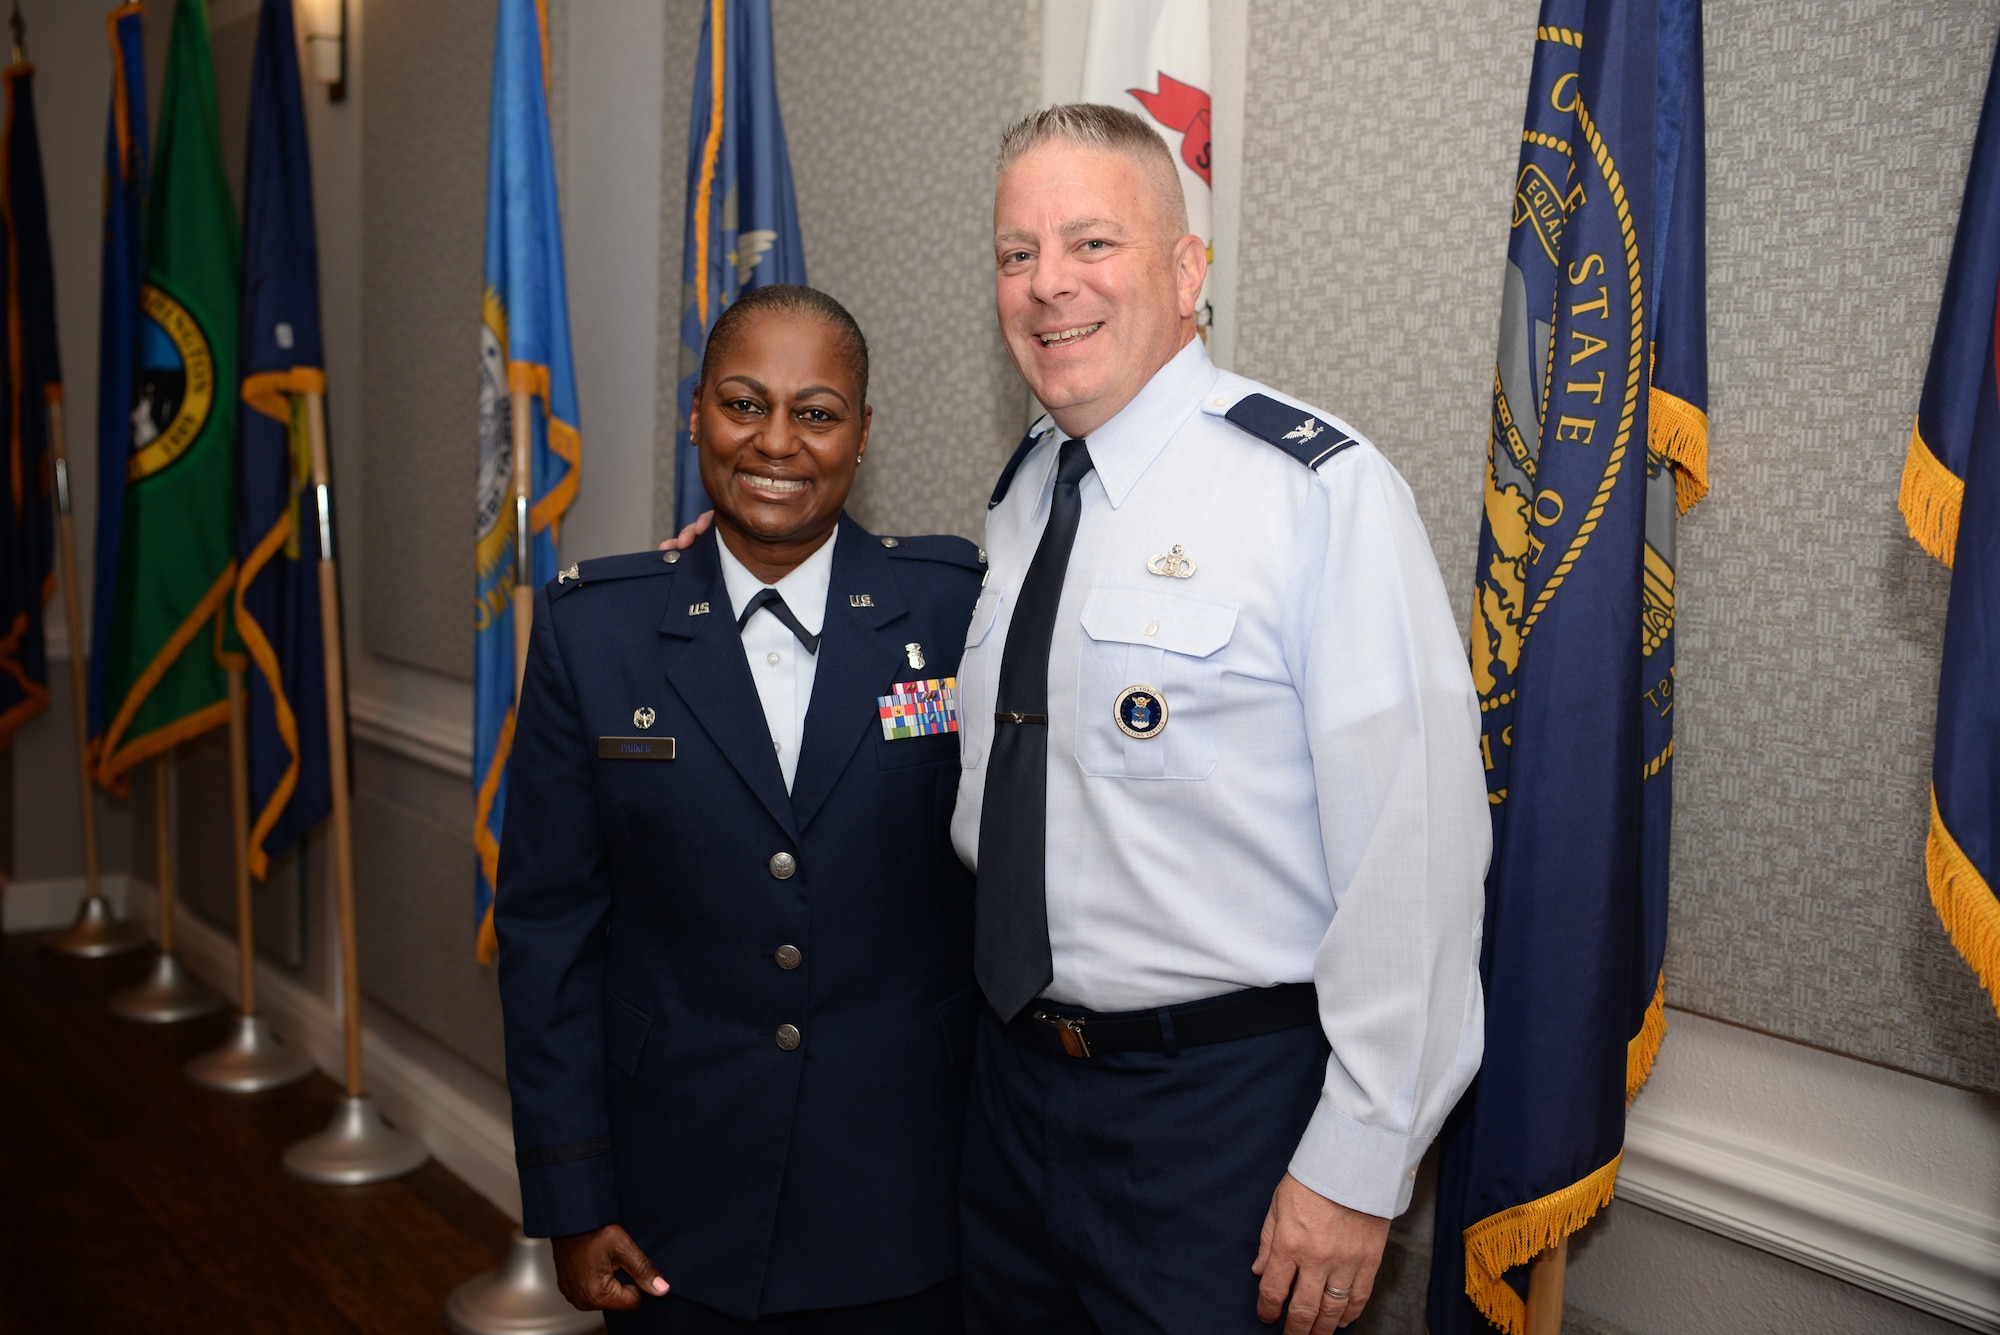 U.S. Air Force Col. Mary Parker, incoming 81st Inpatient Operations Squadron commander, and Retired Col. Robert Trayer, Parker's husband, pose for a photo inside the Don Wylie Auditorium on Keesler Air Force Base, Mississippi, June 21, 2019.